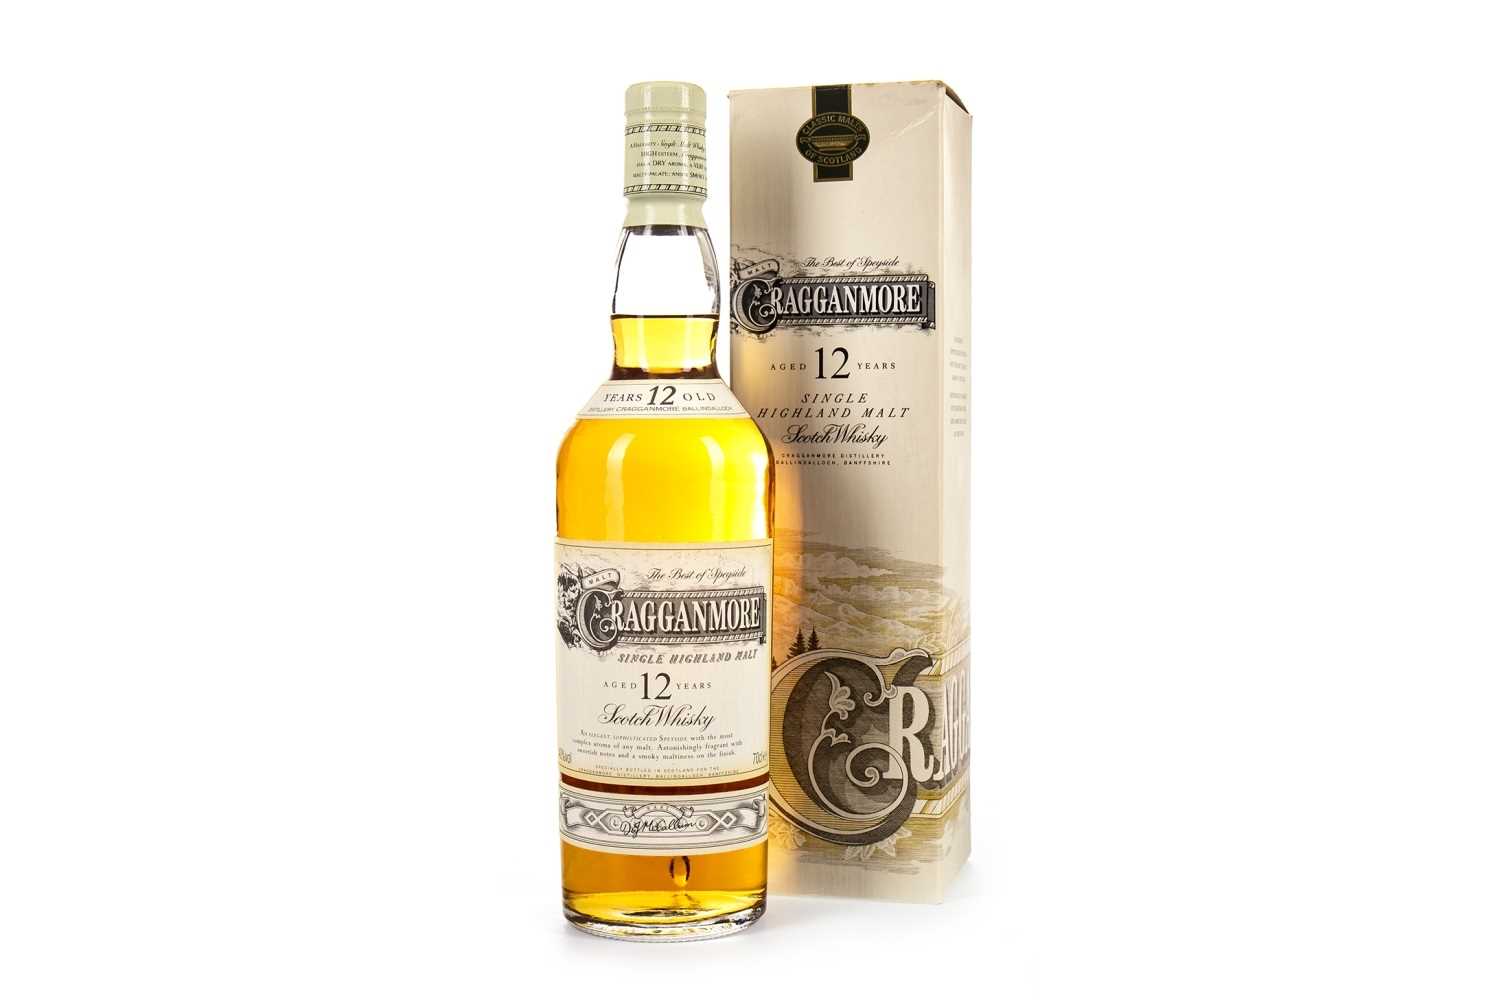 Lot 302 - CRAGGANMORE AGED 12 YEARS